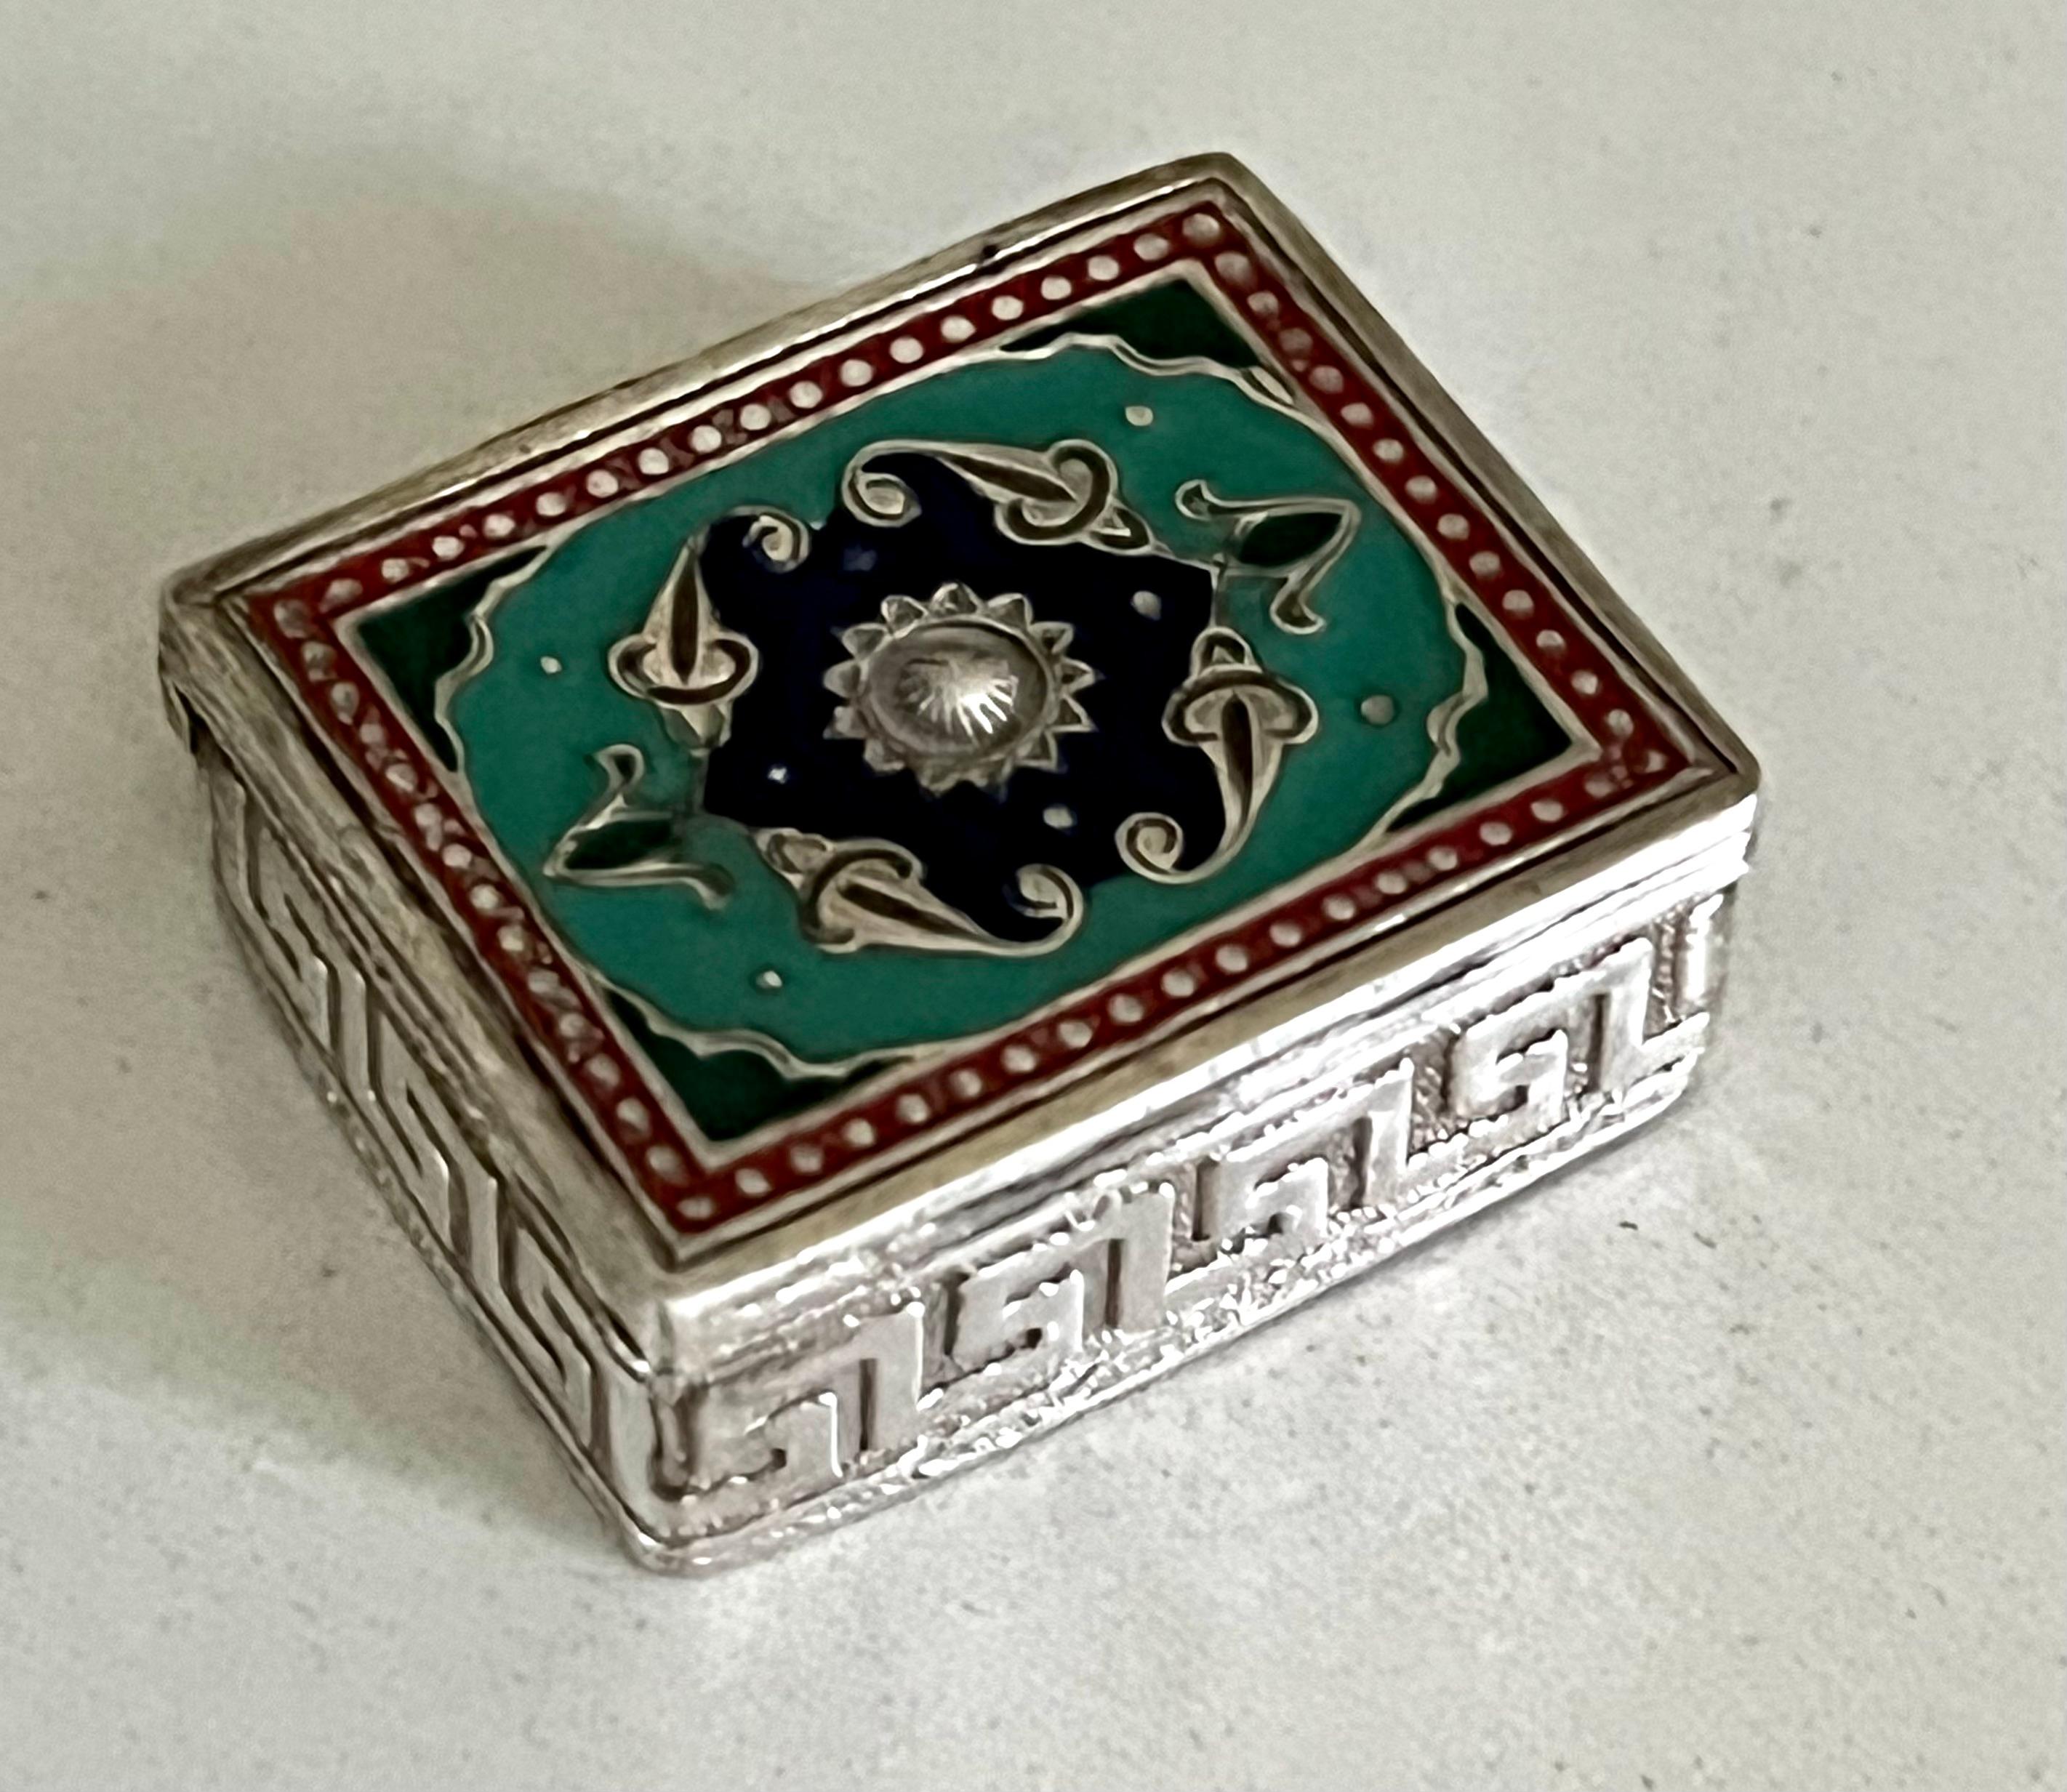 A silver snuff or pill box - all hand made and beautifully trimmed in enamel with a greek key detail around the edge of the box. great for pills, 420, or incense.